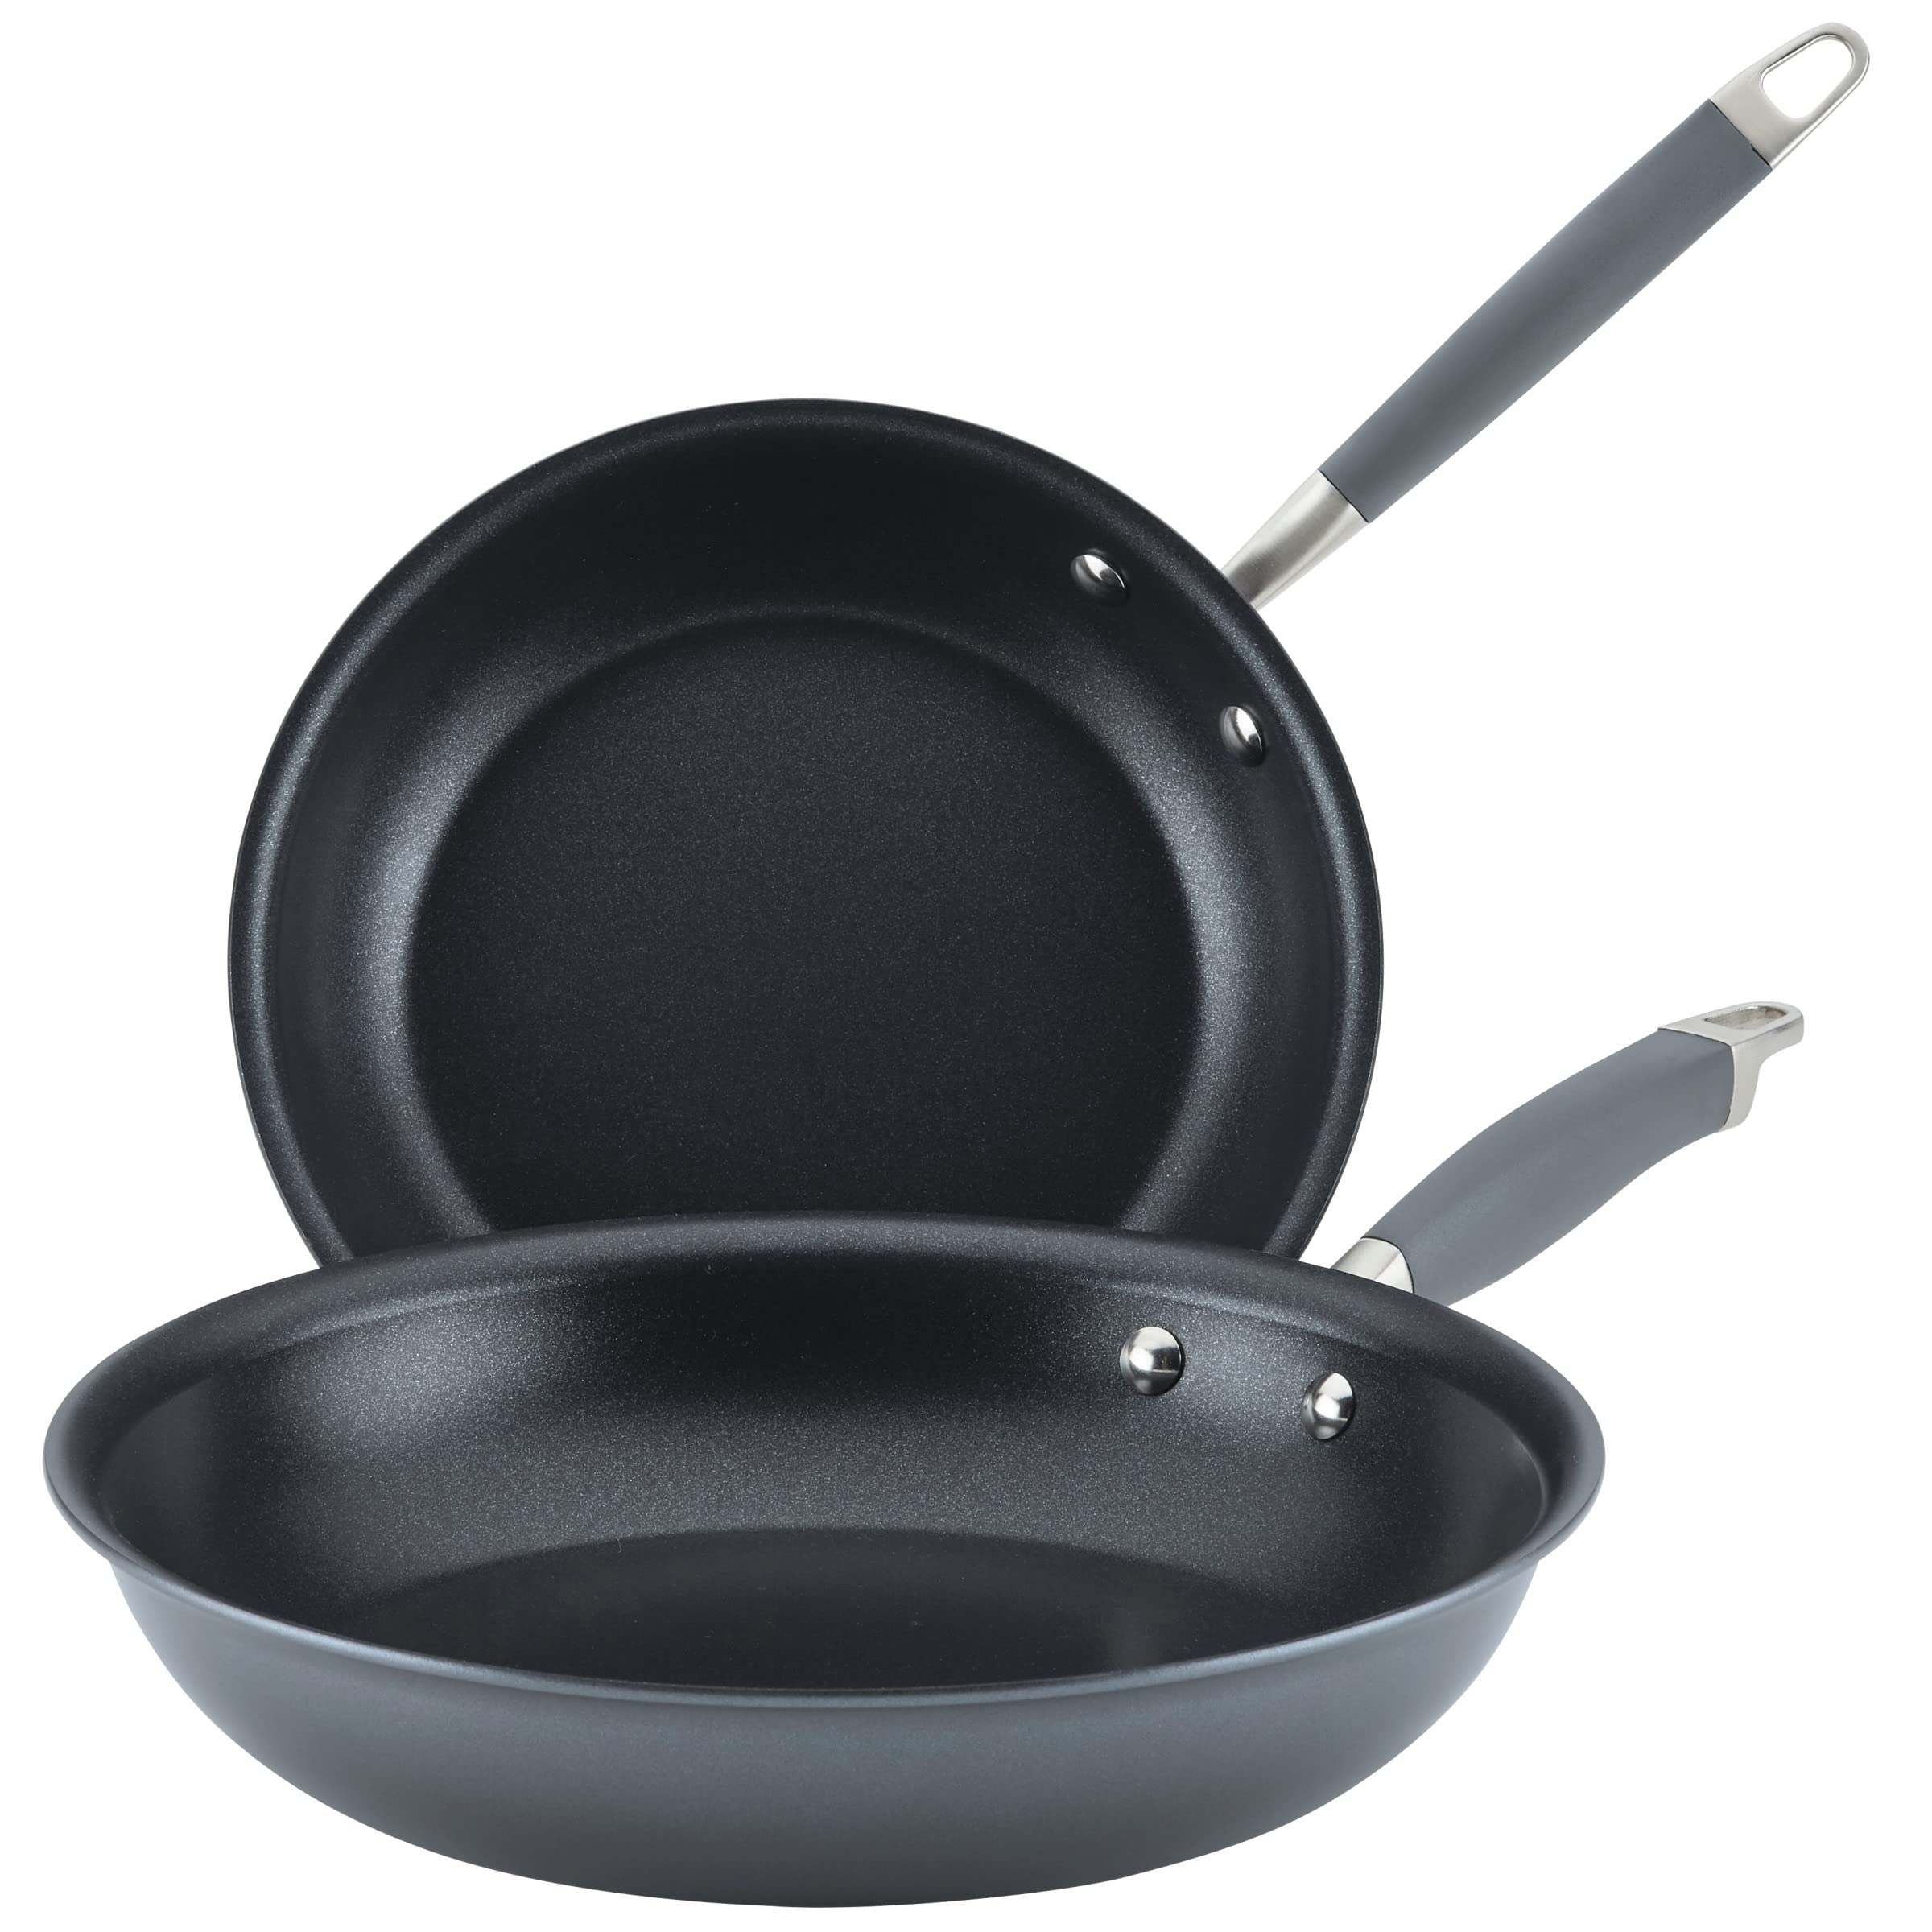 2-Piece Anolon Advanced Home Hard-Anodized Nonstick Skillets (10.25" & 12.75" Moonstone) $40 + Free Shipping